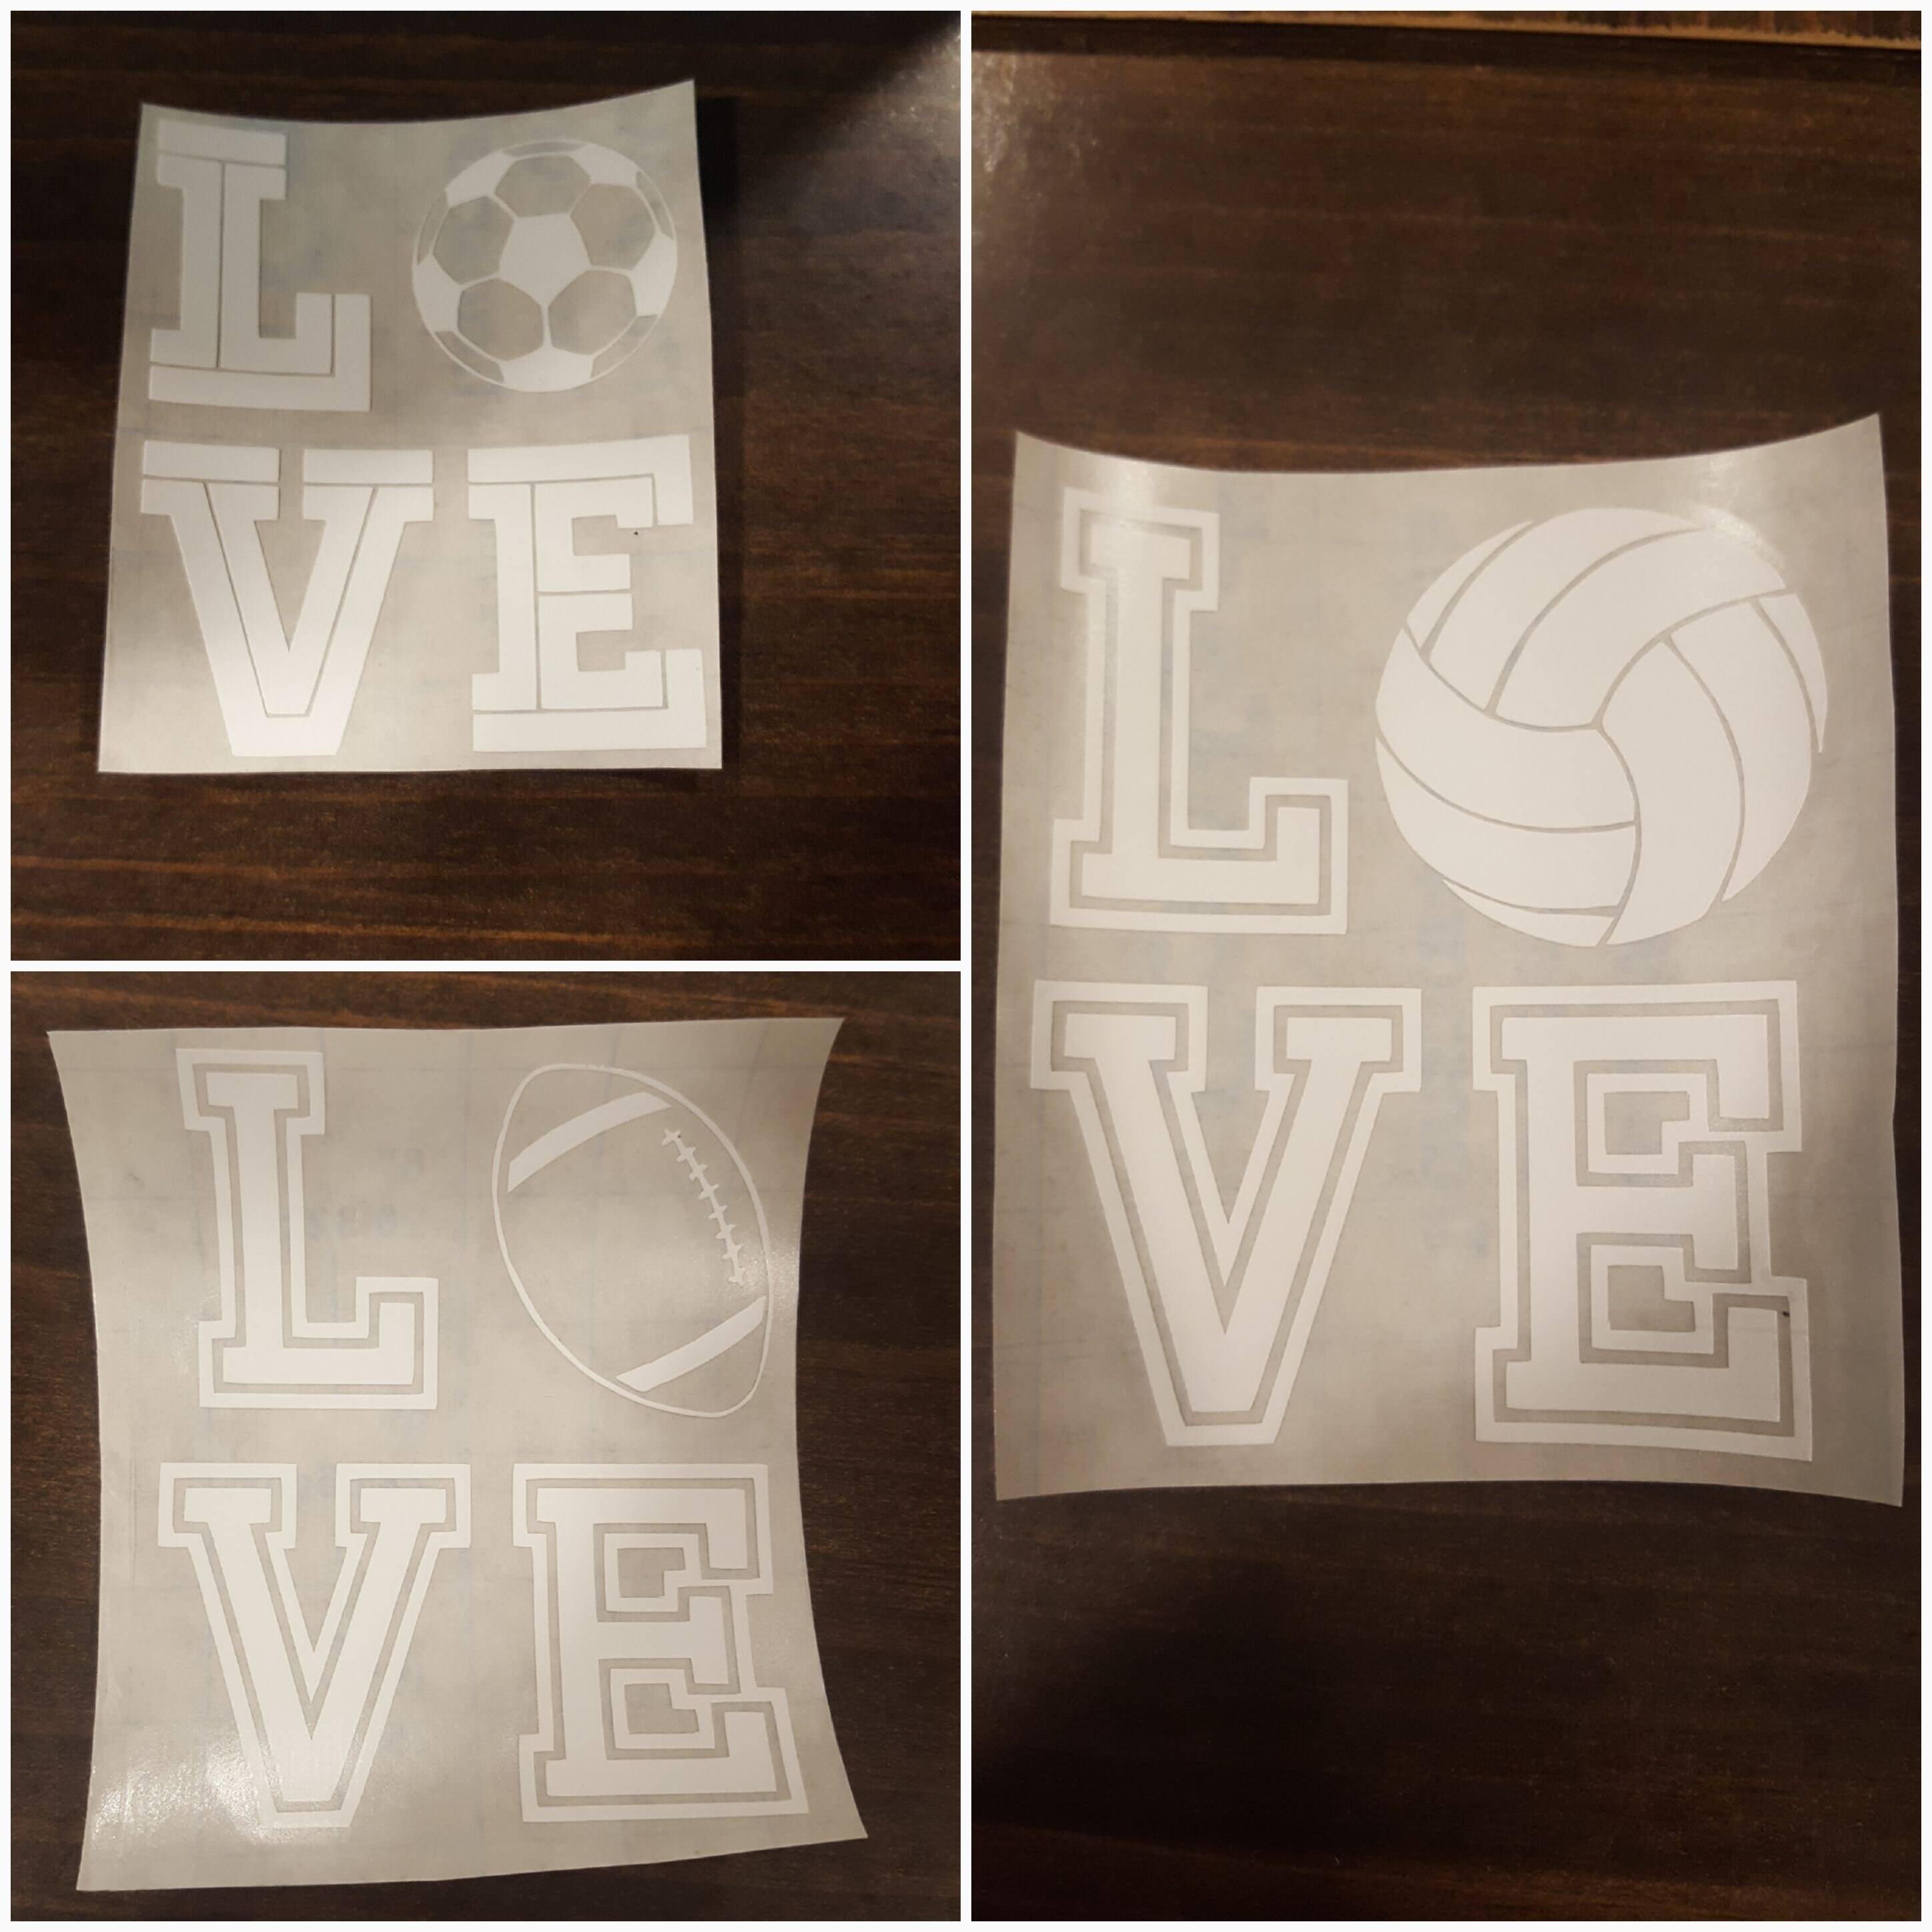 Love Soccer Love Football Love Volleyball 3 options to chose from Decal